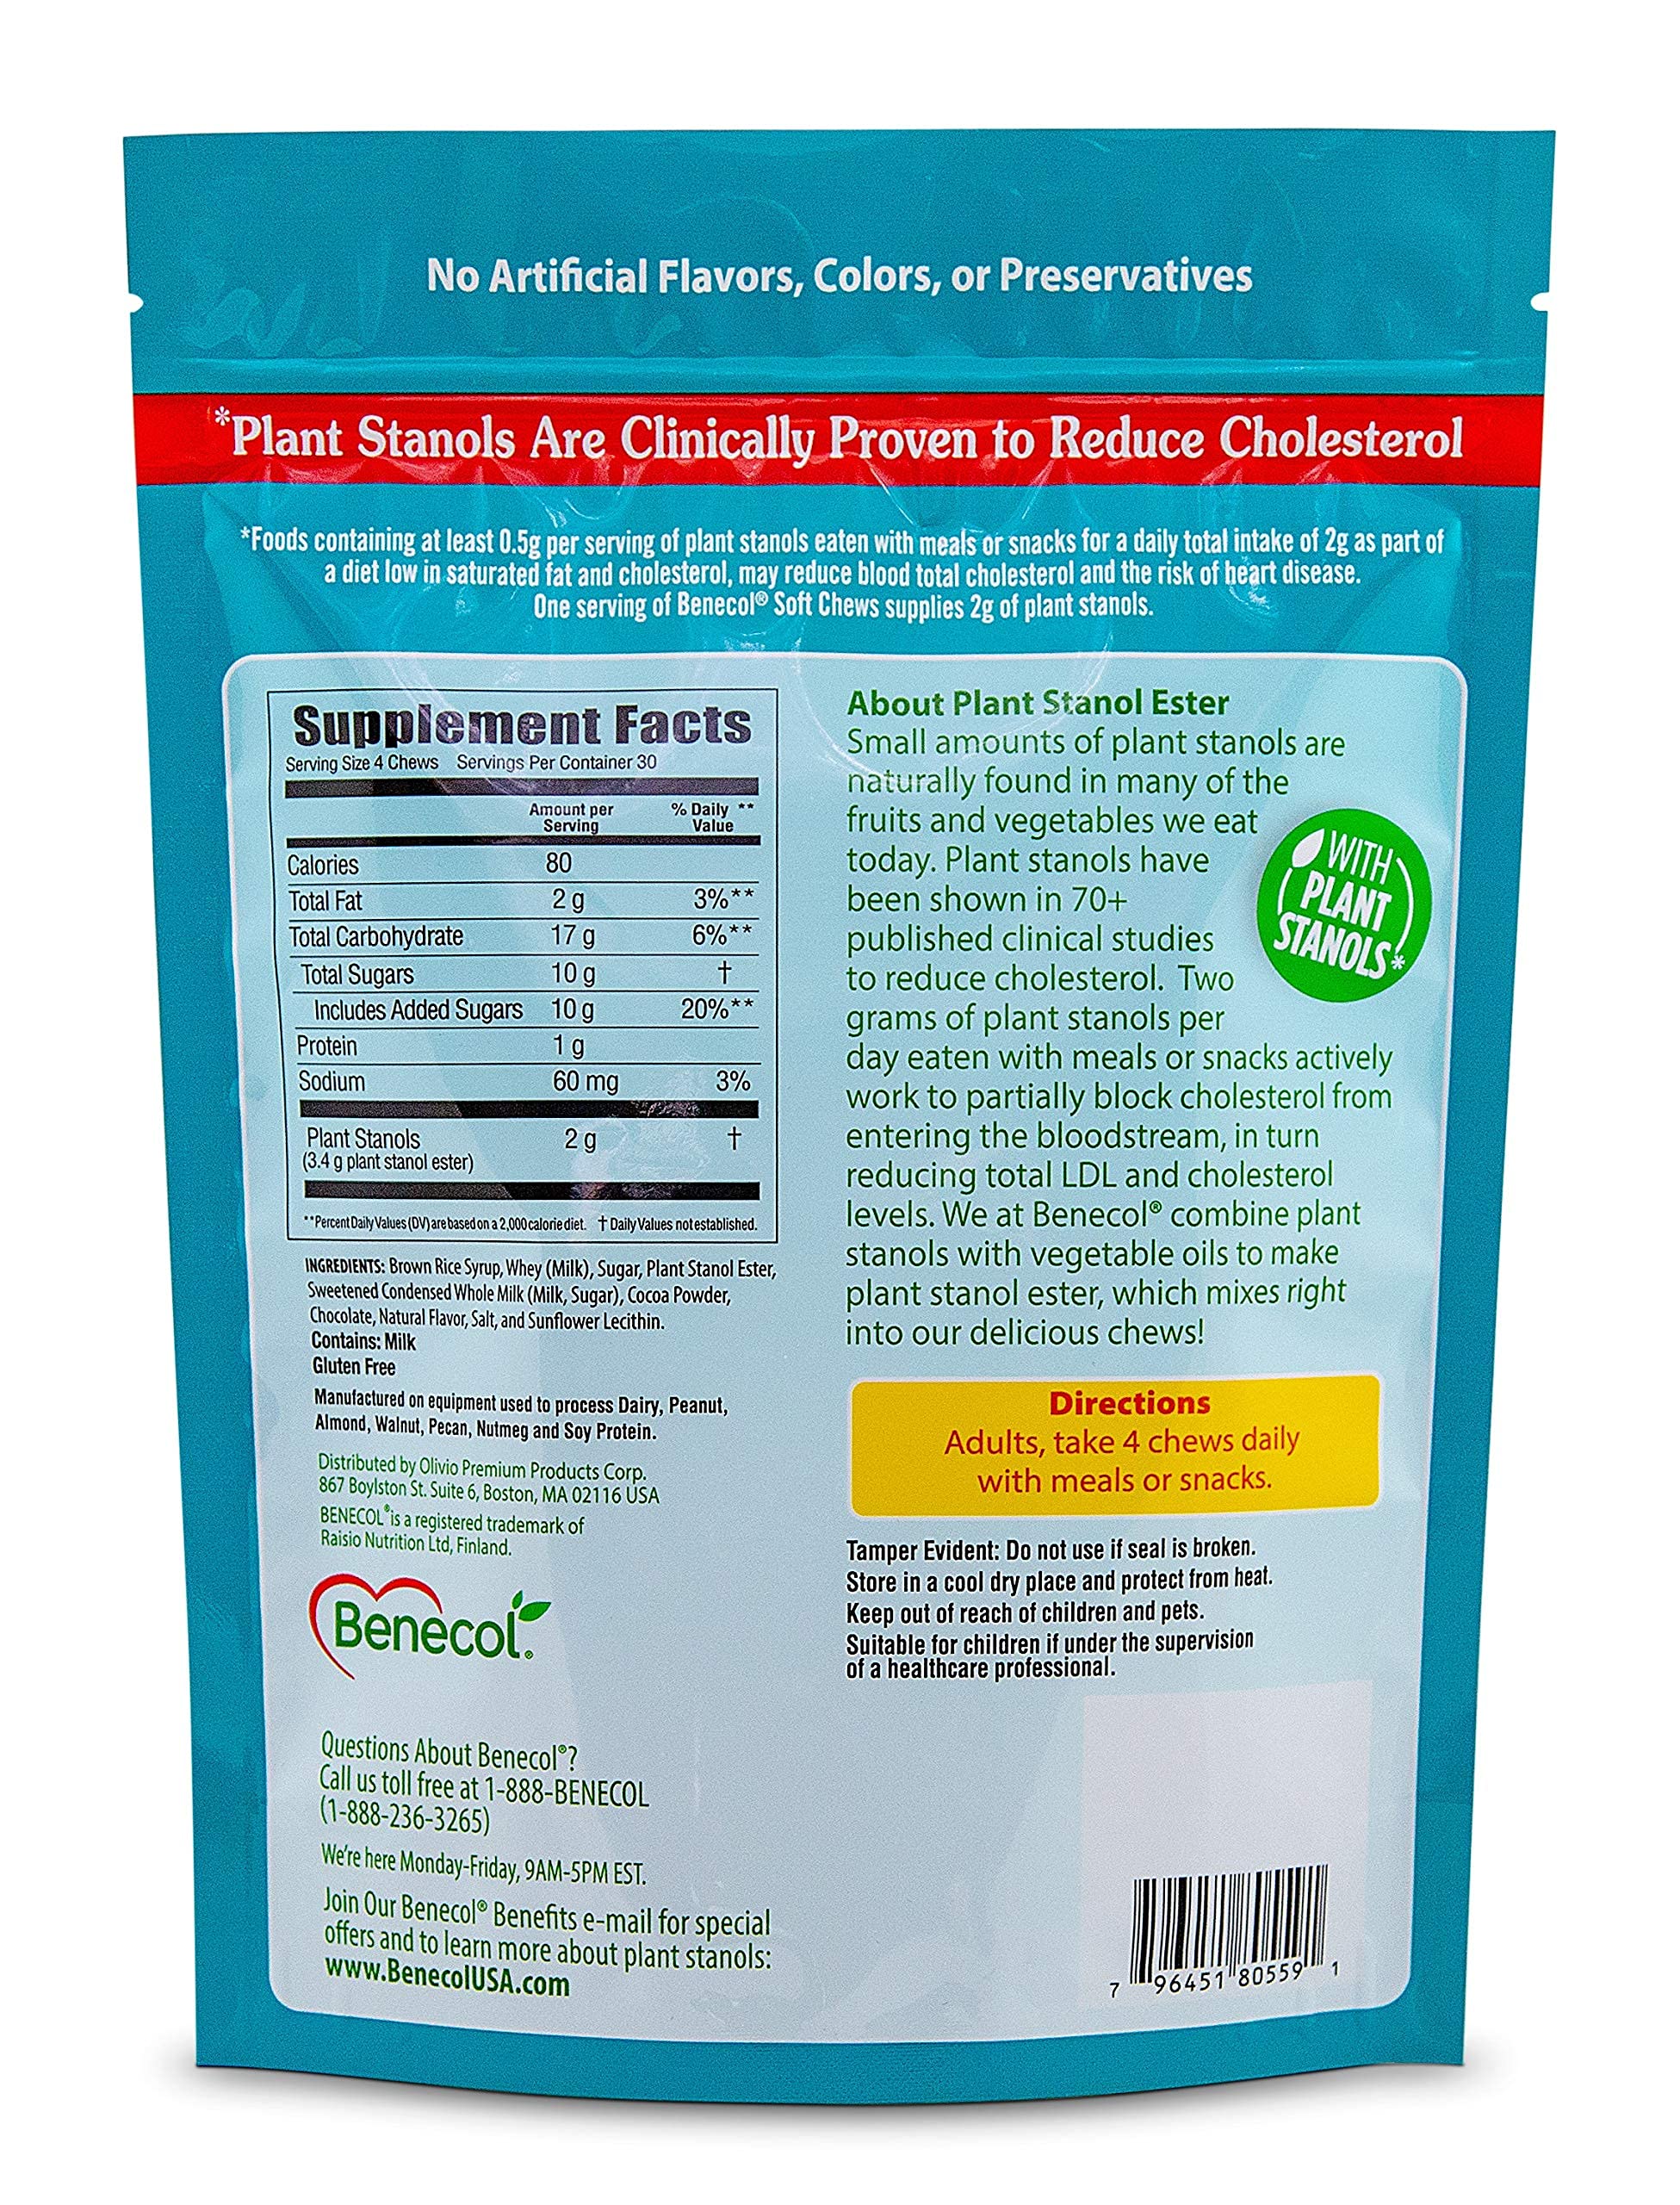 Benecol® Soft Chews - Made with Cholesterol-Lowering Plant Stanols, which are Clinically Proven to Reduce Total & LDL Cholesterol* - Dietary Supplement (120 Chocolate Chews)